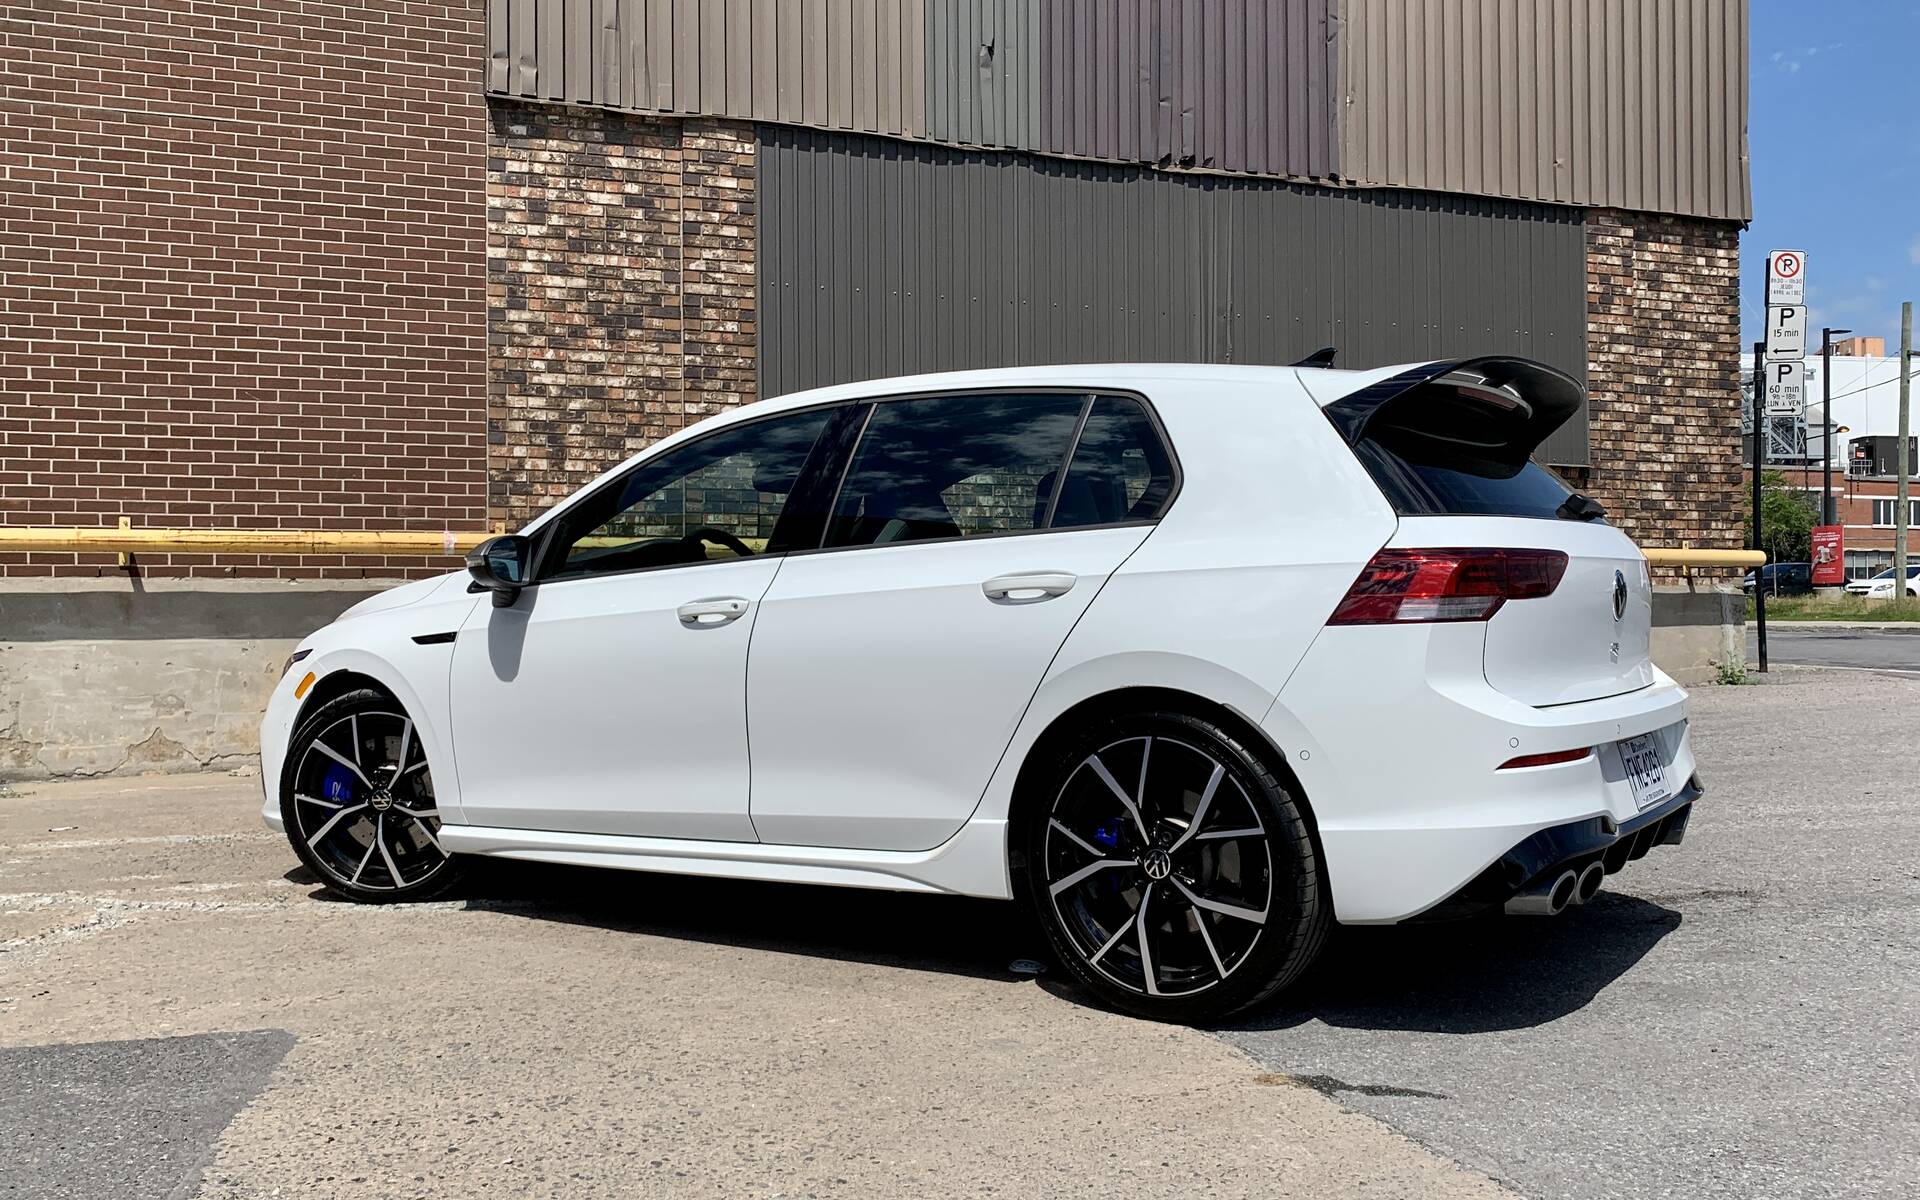 2022 Volkswagen Golf R: Does R Stand for Rare? - 6/21